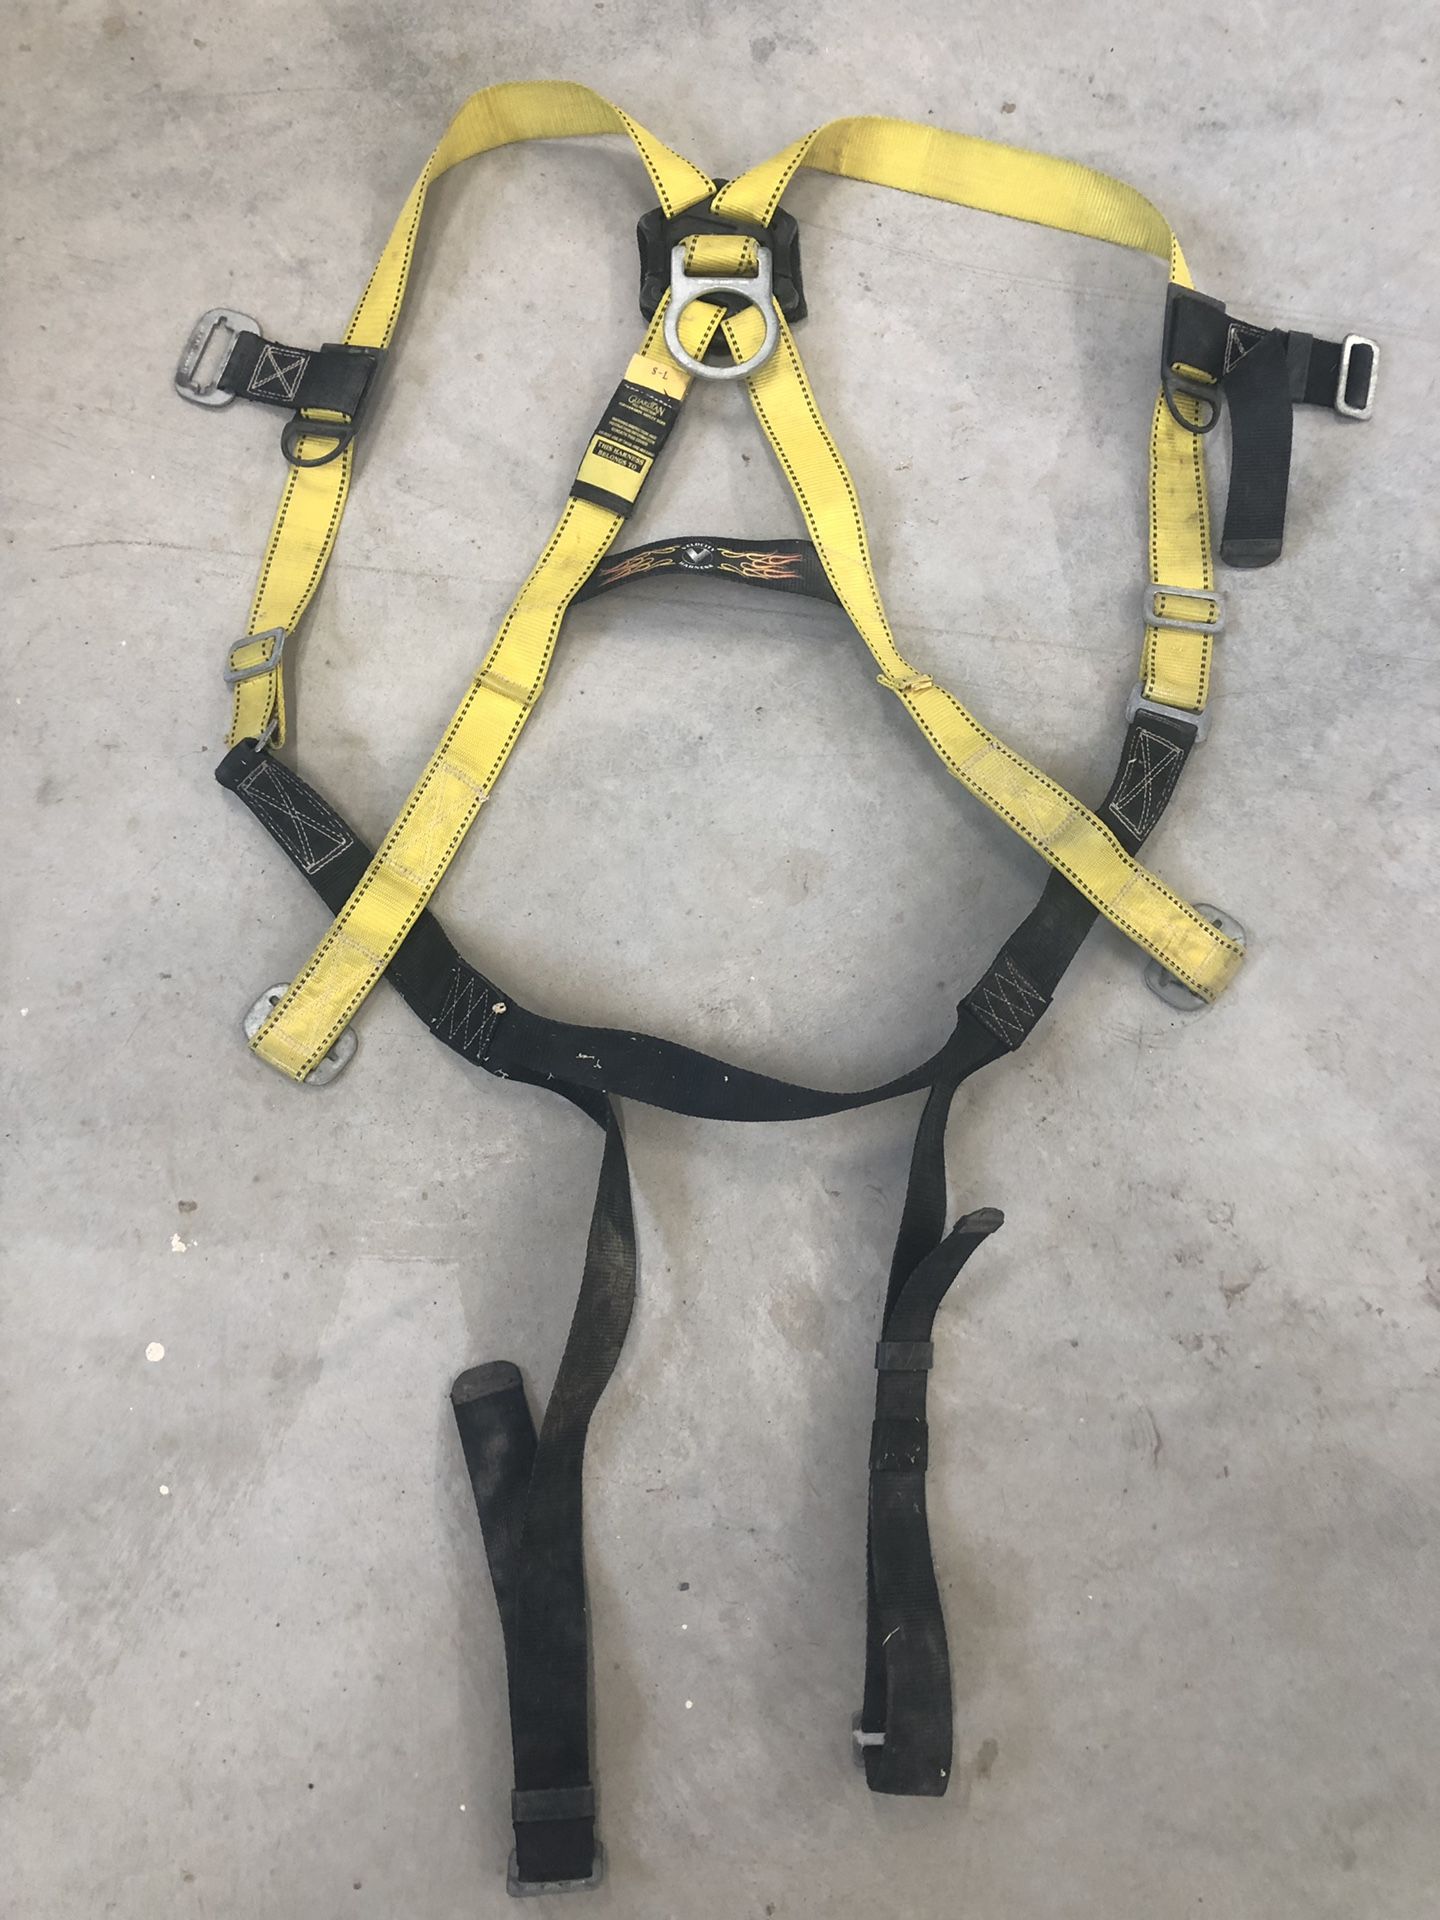 Guardian Fall Protection Velocity Harness - Size Small through Large